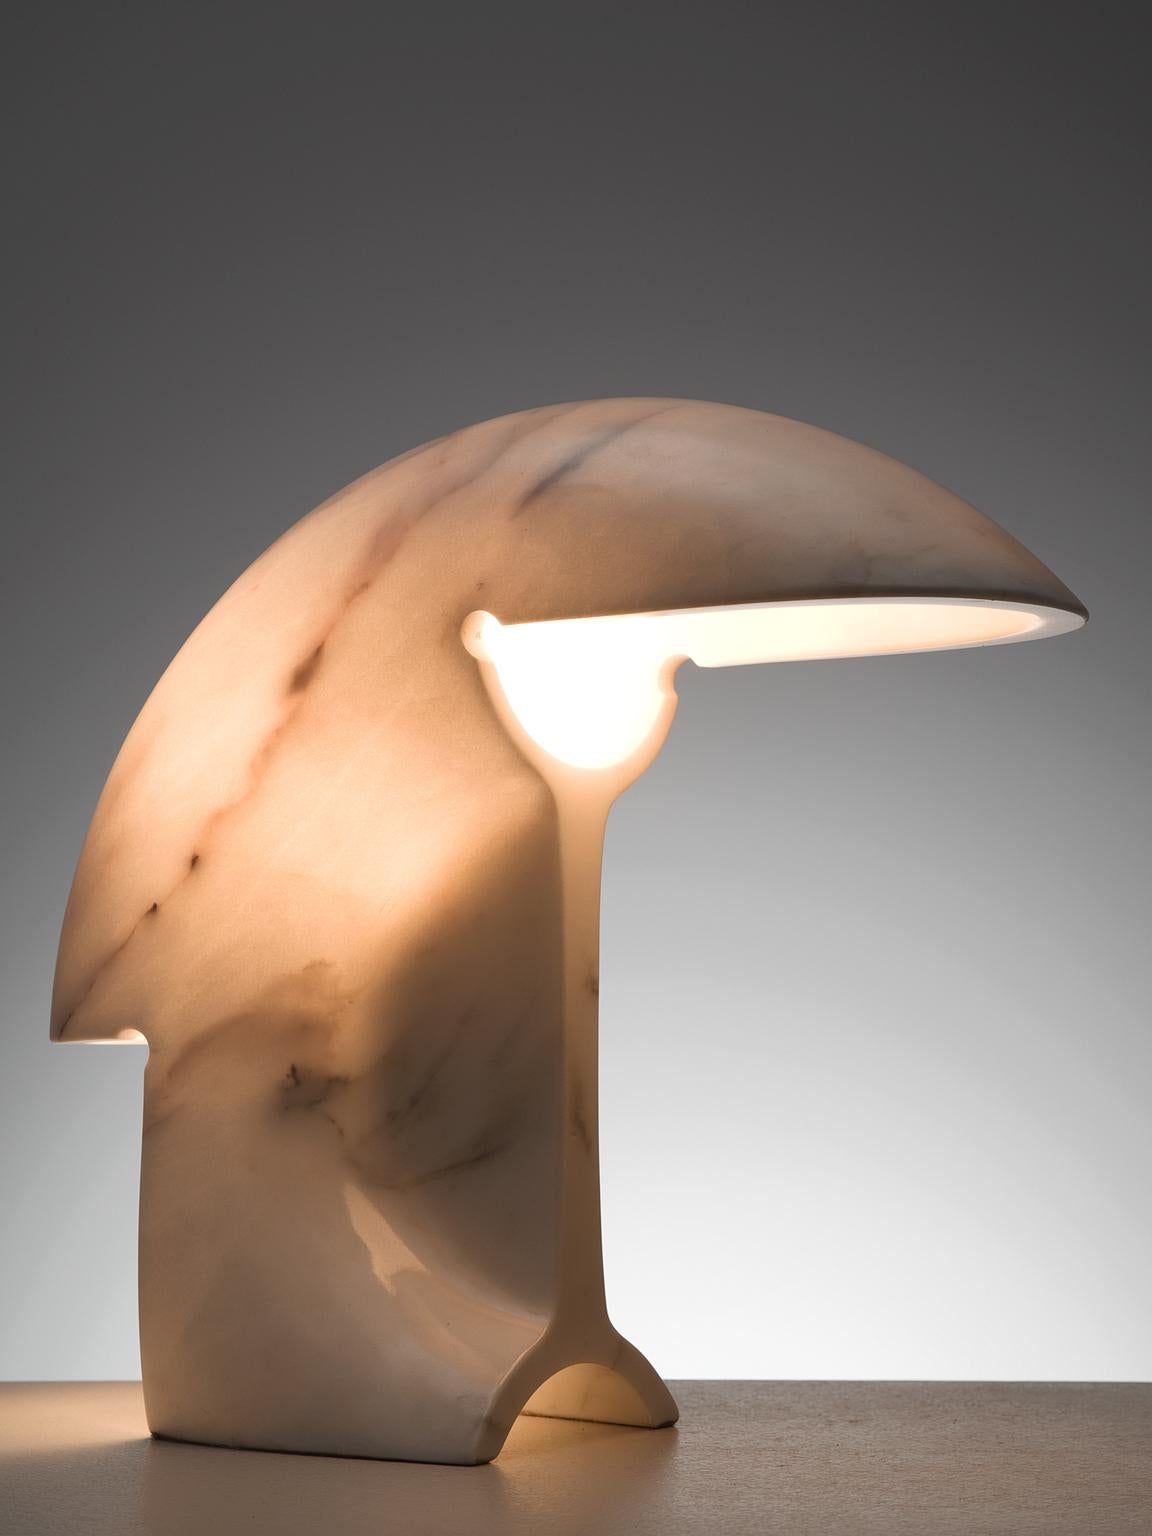 Tobia Scarpa for Flos, 'Biagio' Table Lamp, Marble, Italy, late 1960s.

Exquisite table lamp designed by Tobia Scarpa in ca. 1968. This model table lamp is especially notable since it's made out of one piece Carrara marble. A sculptural piece that